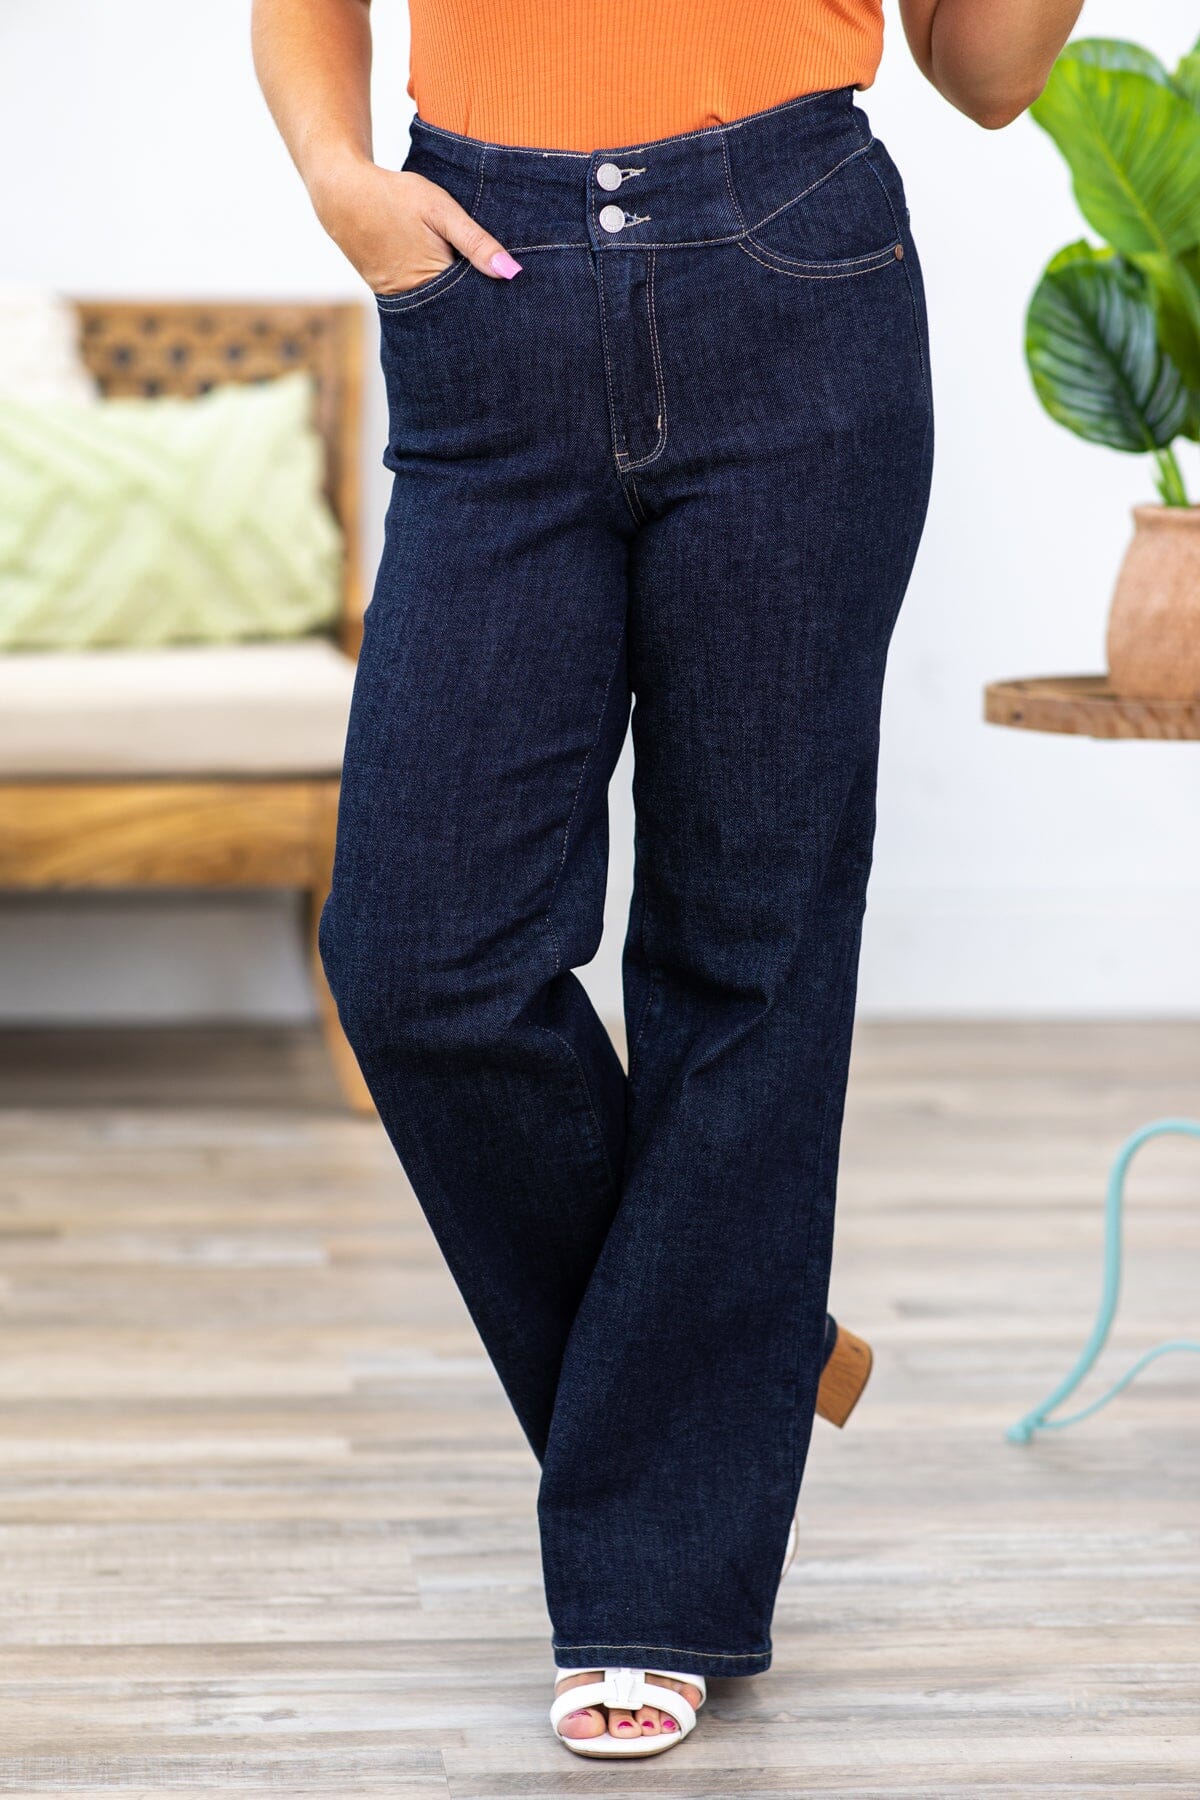 Judy Blue Dark Washed Wide Leg Jeans - Filly Flair